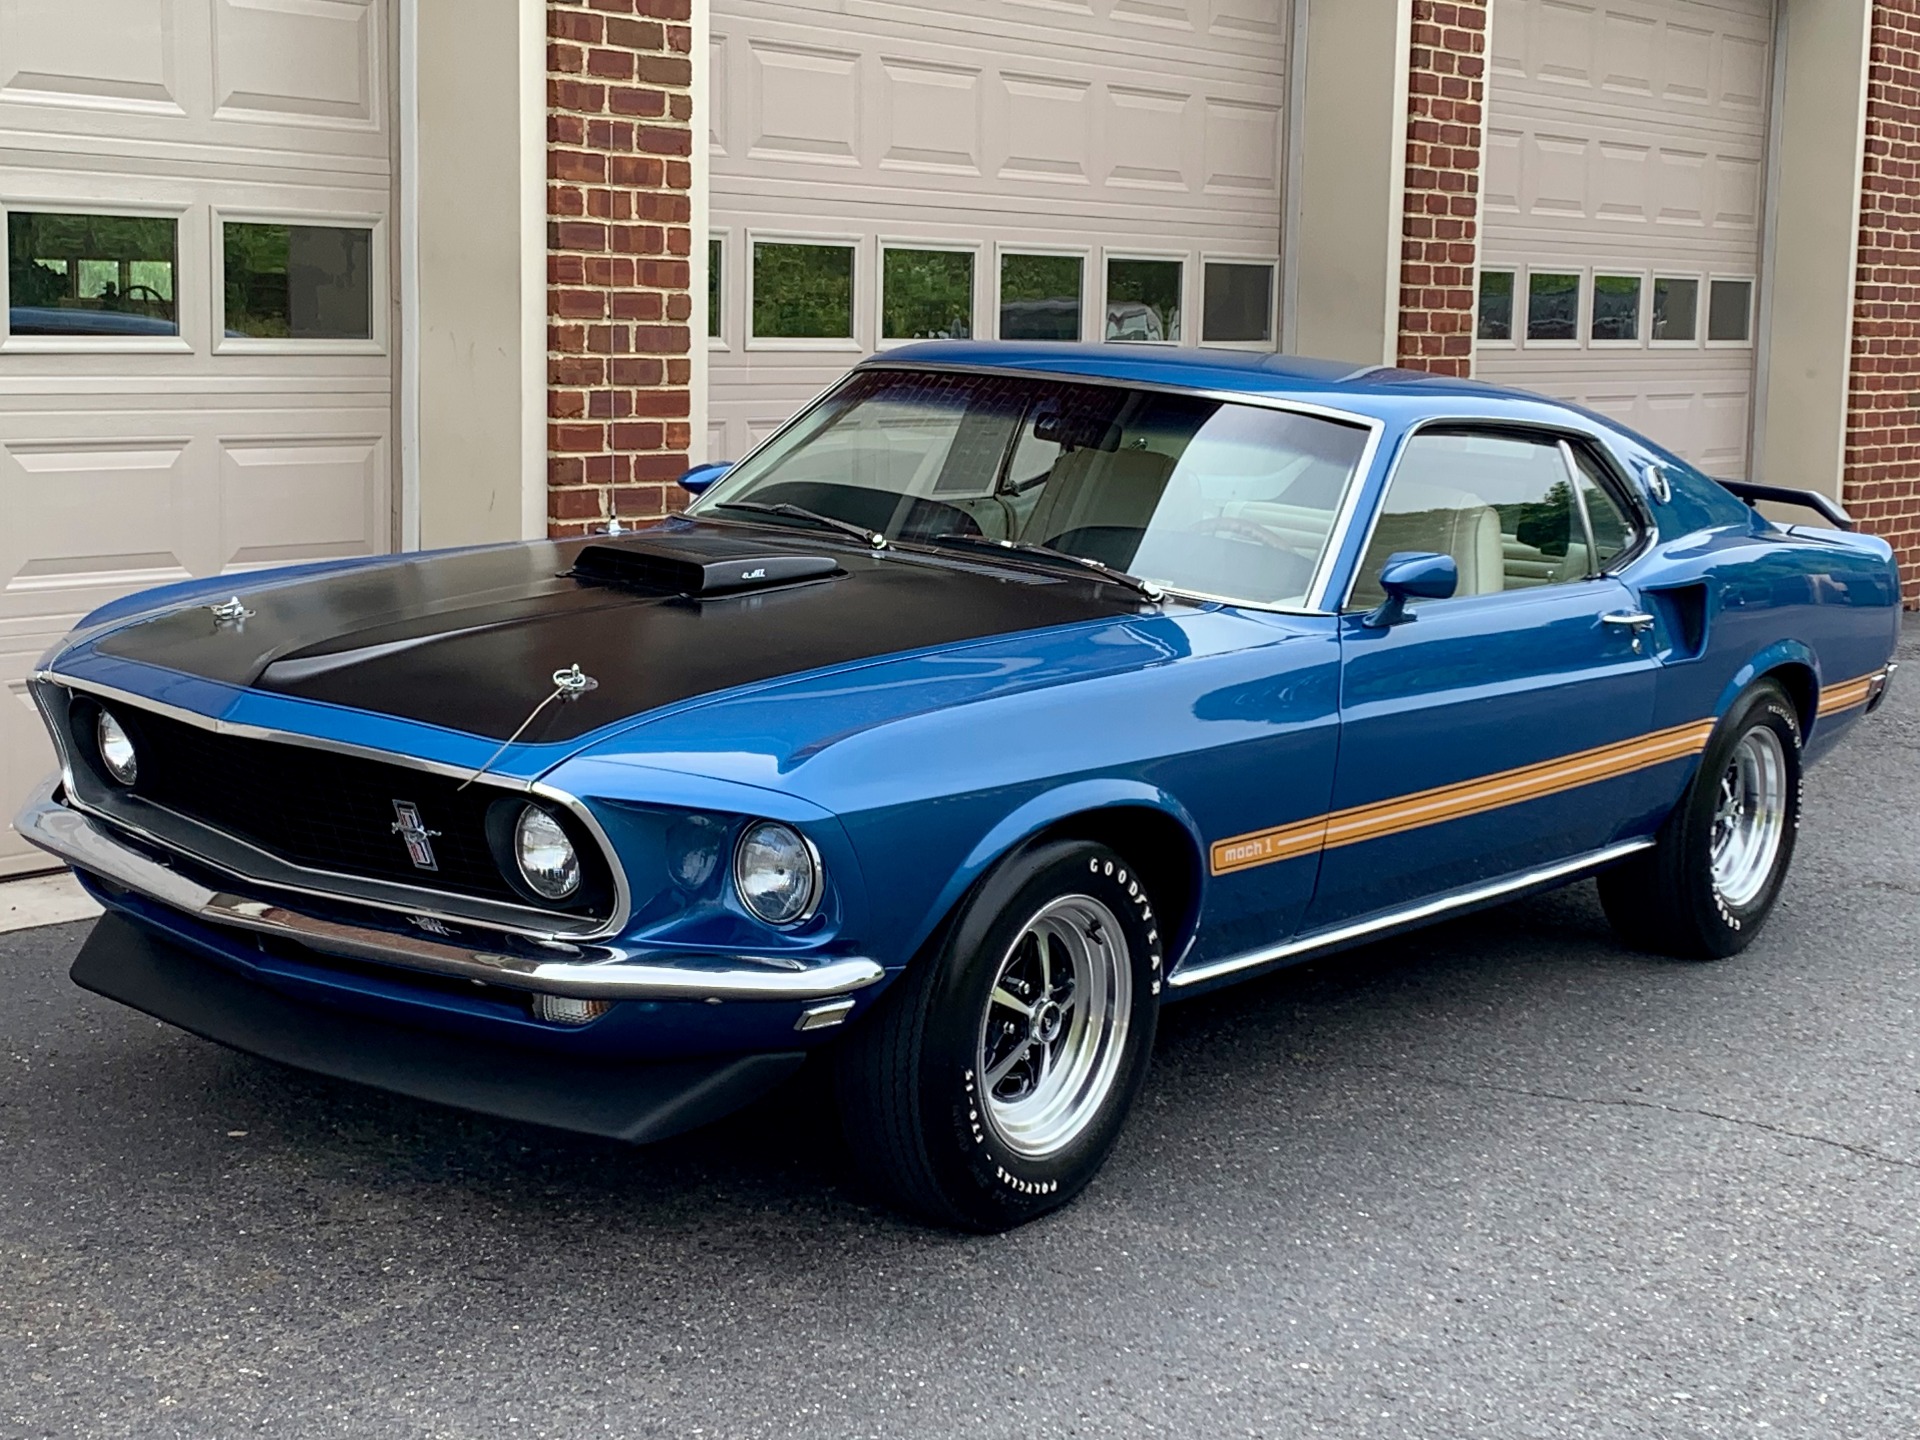 1969 Ford Mustang Mach 1 428 Cobra Jet Stock 168618 For Sale Near